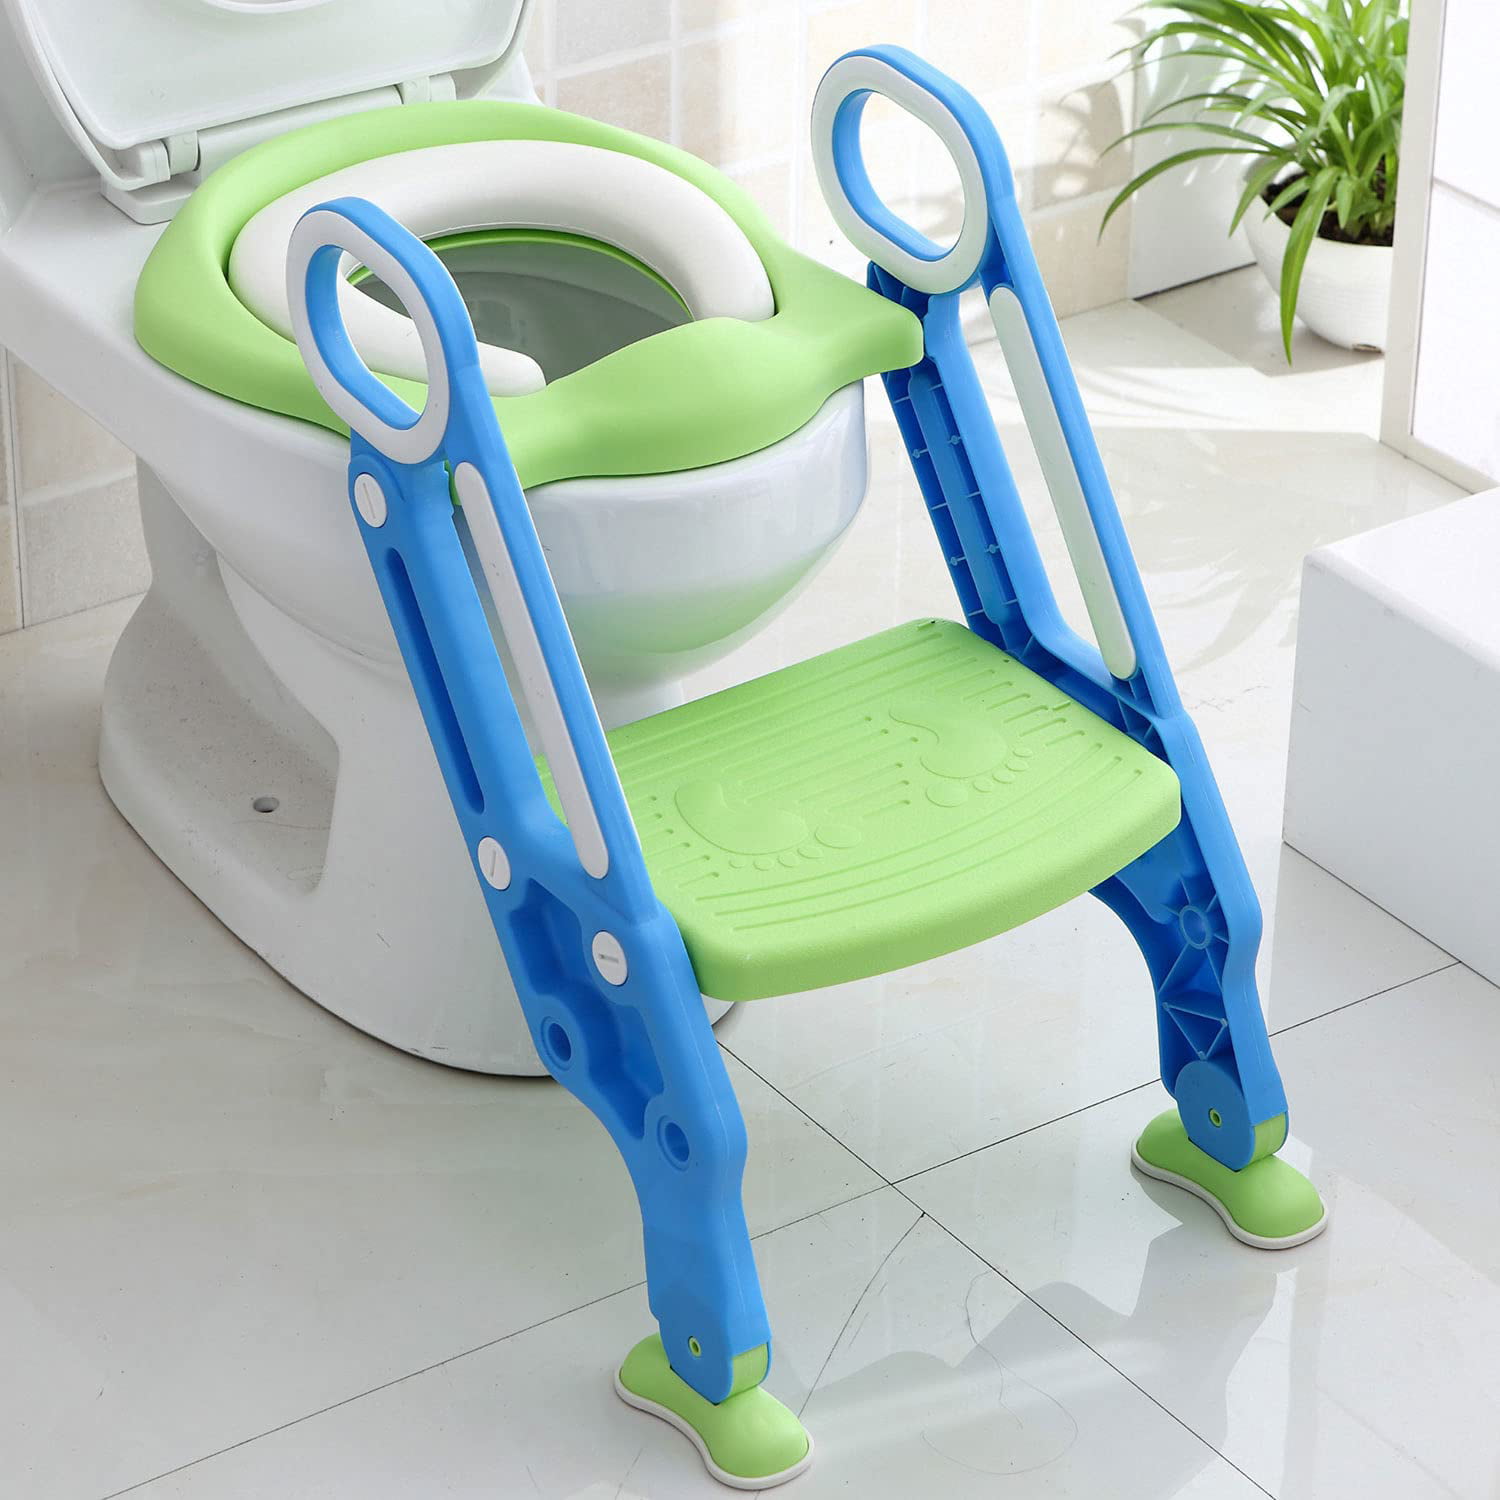 Toddler Toilet Chair Kids Potty Training Seat with Step Stool Ladder for Kids 